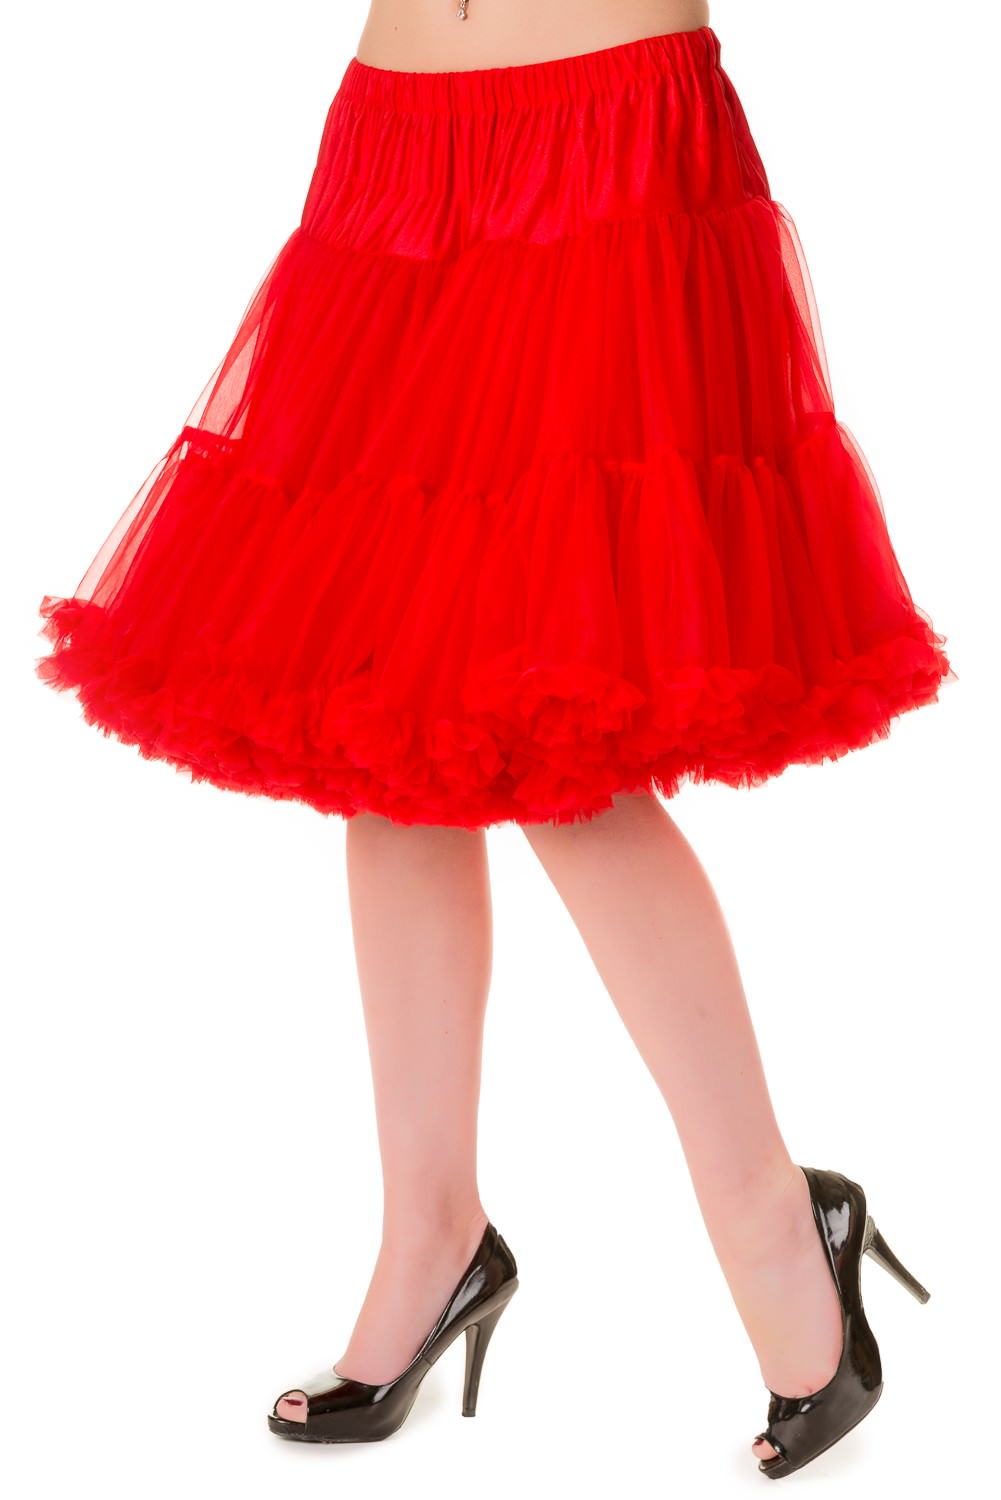 WALKABOUT PETTICOAT RED